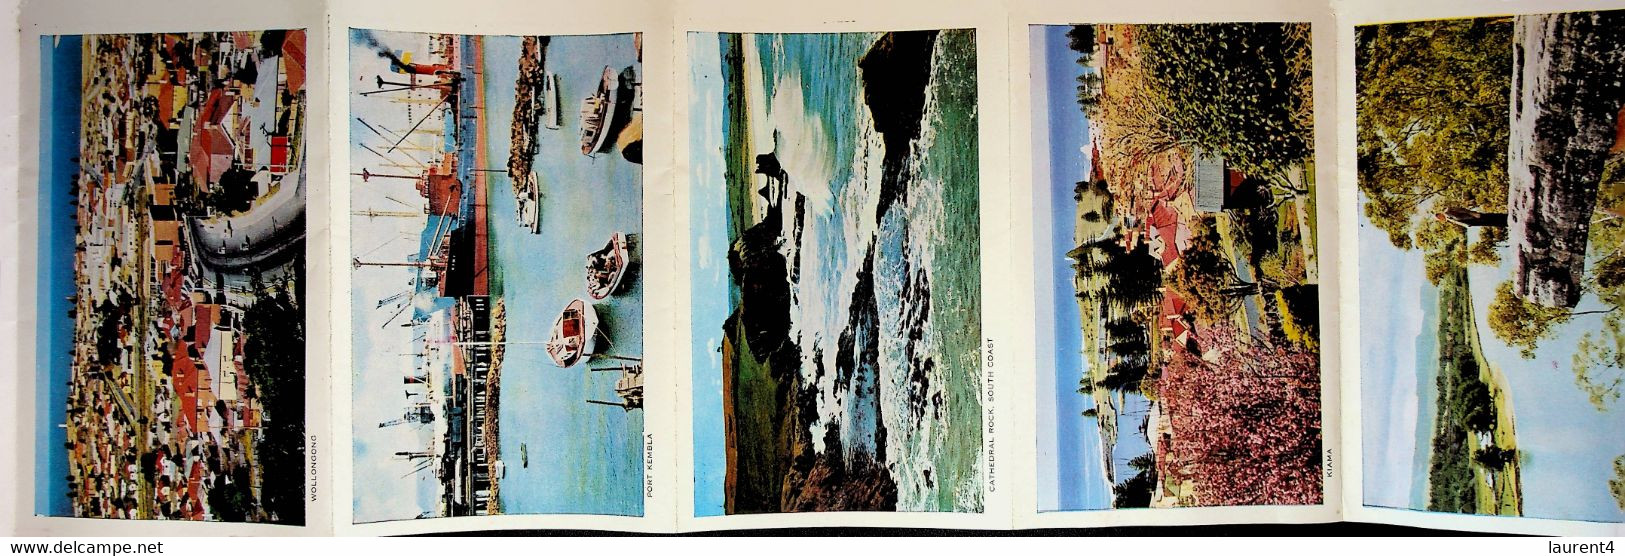 (Booklet 117) Australia - NSW - South Coast - Wollongong